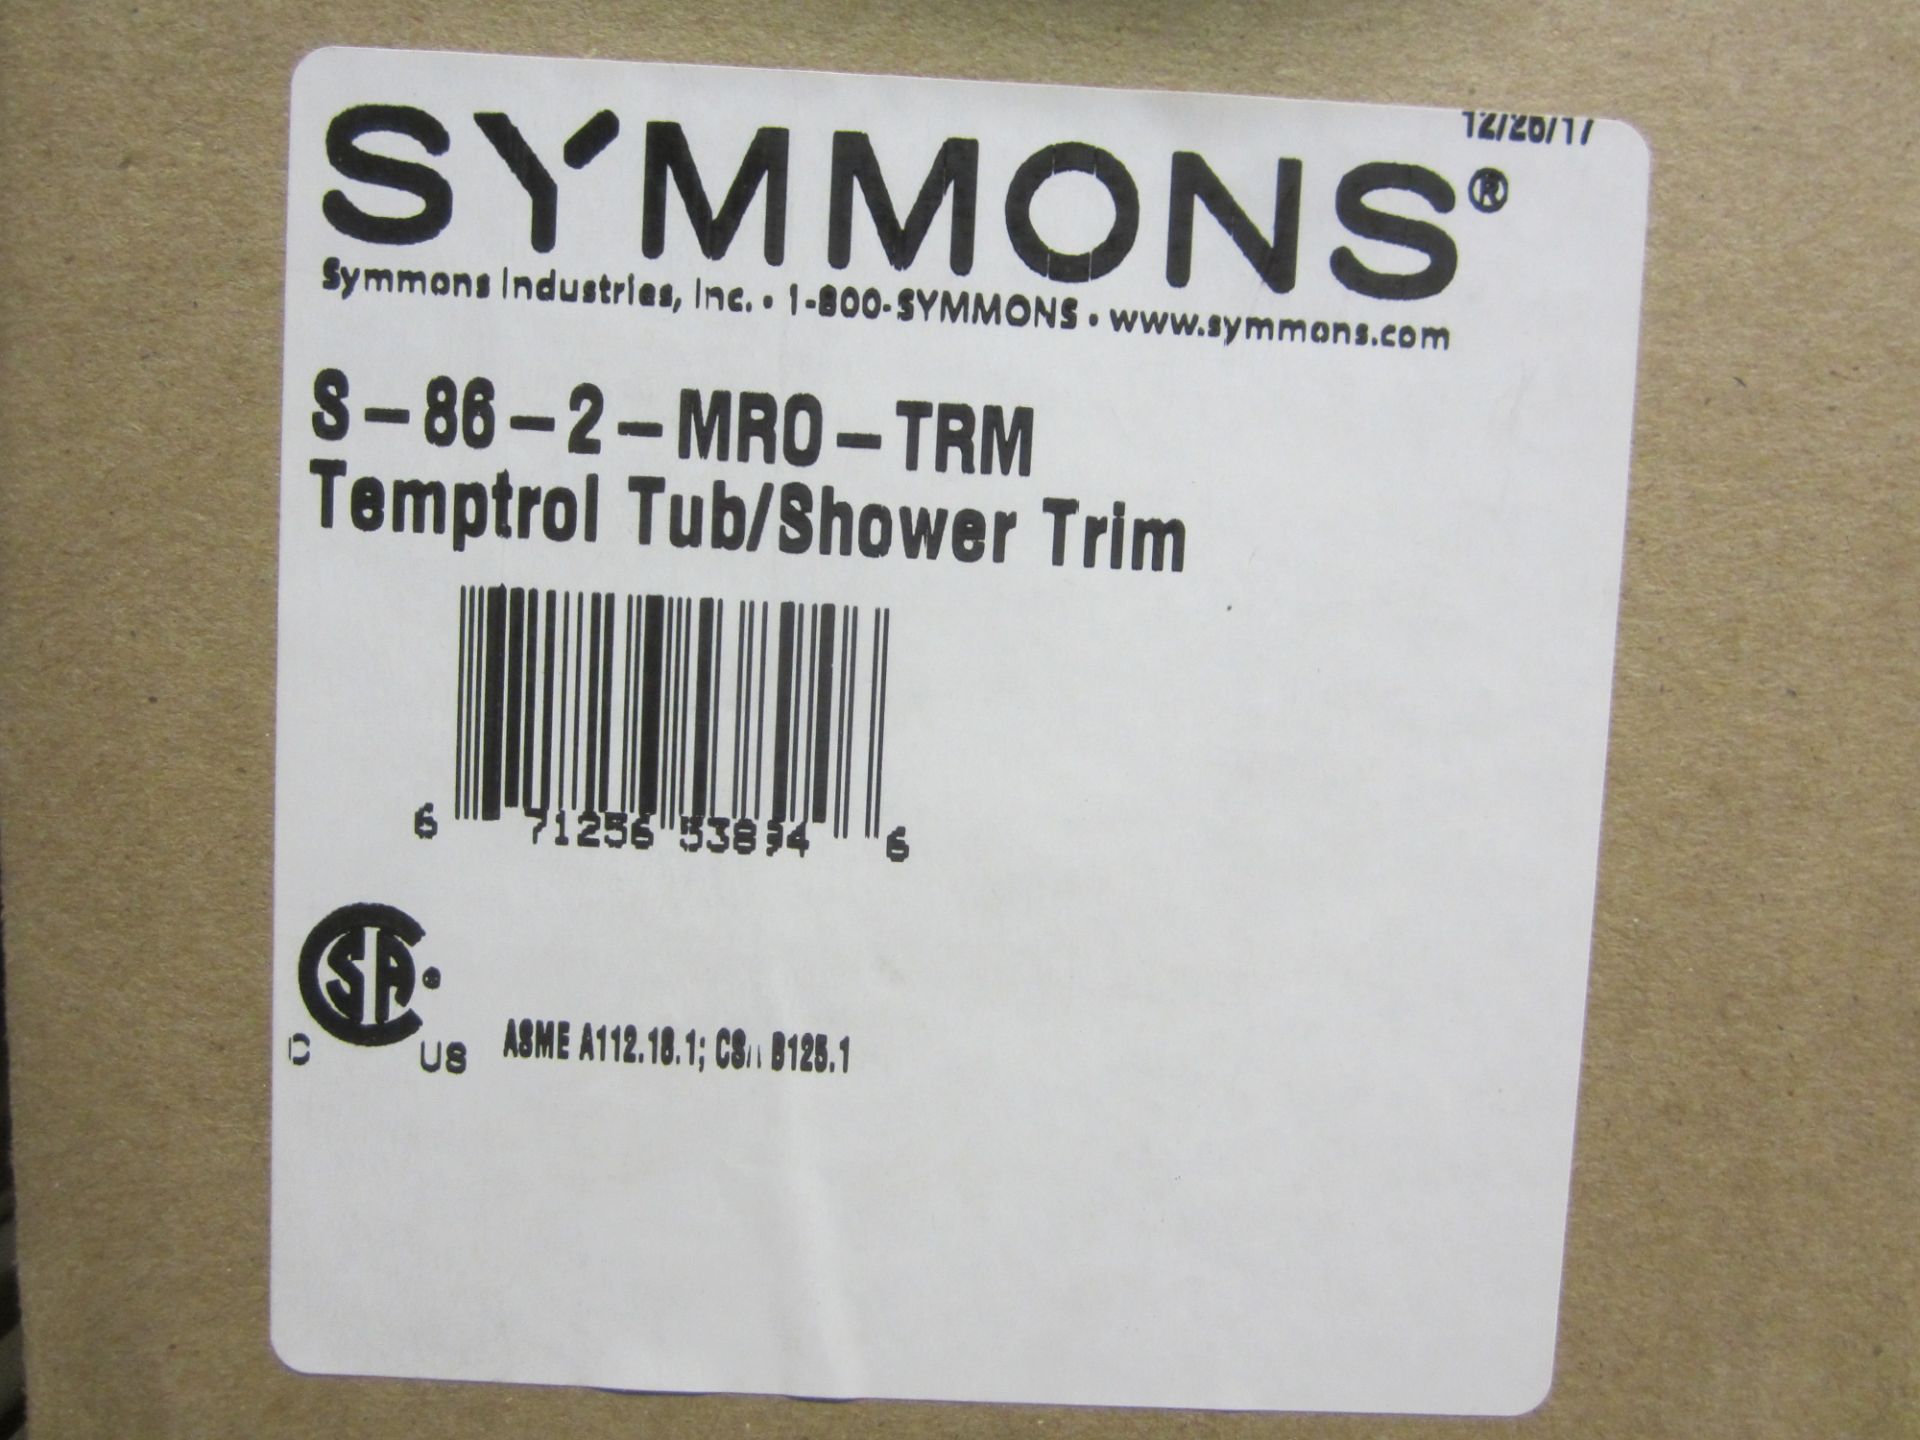 (10) Symmons Tub/Shower Twin Sets, (3) Symmons Temptrol Boides, and (2) 8 Packs of Wax Rings - Image 2 of 4